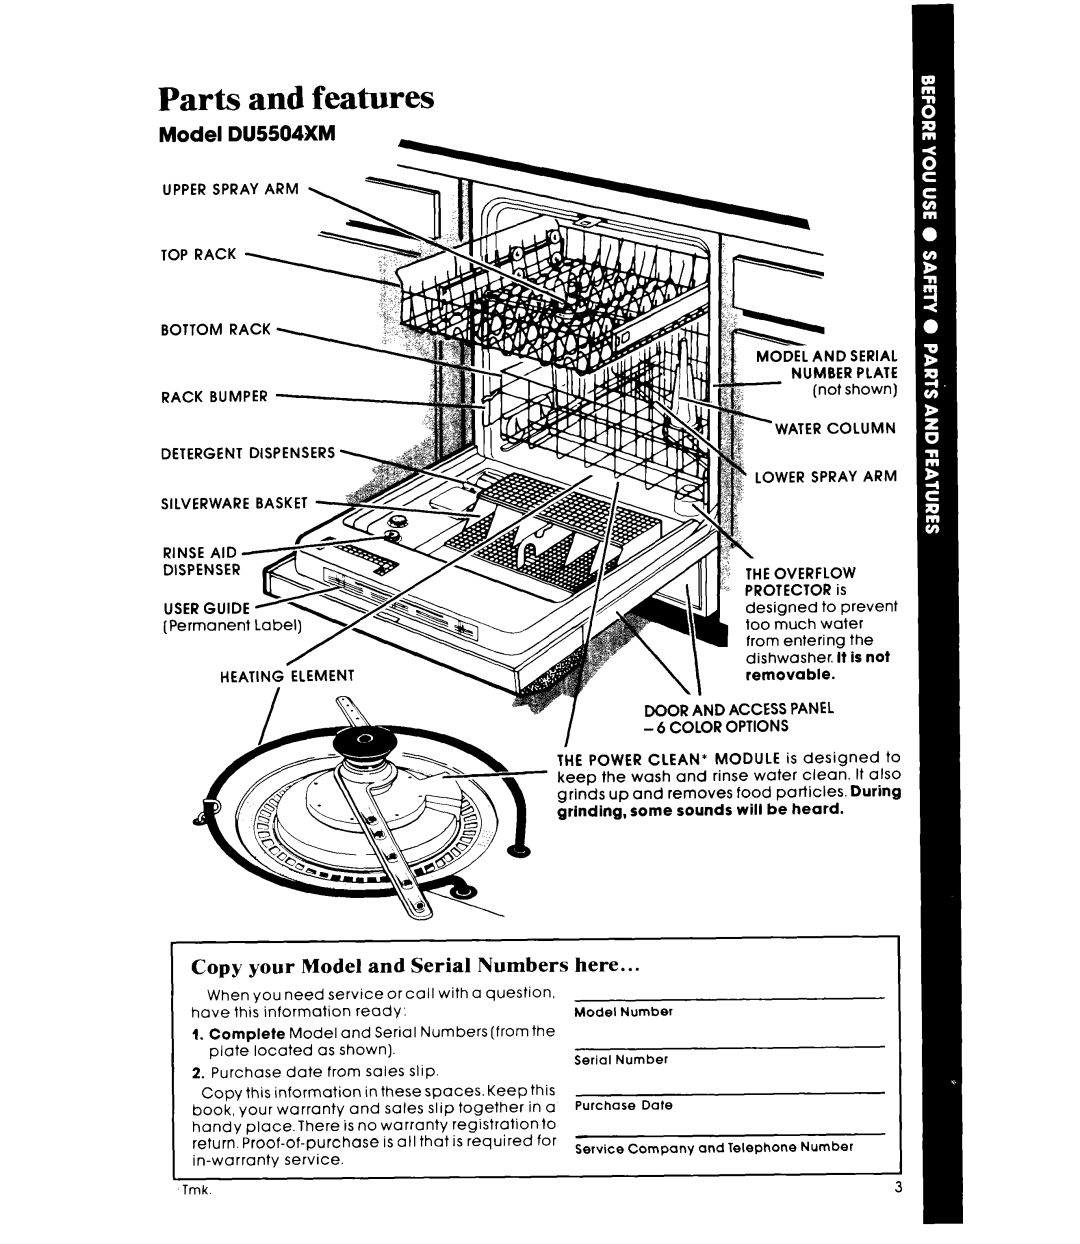 Whirlpool DU5504XM manual Parts and features, Copy your Model and Serial Numbers, here, Model DlJ5504XM 